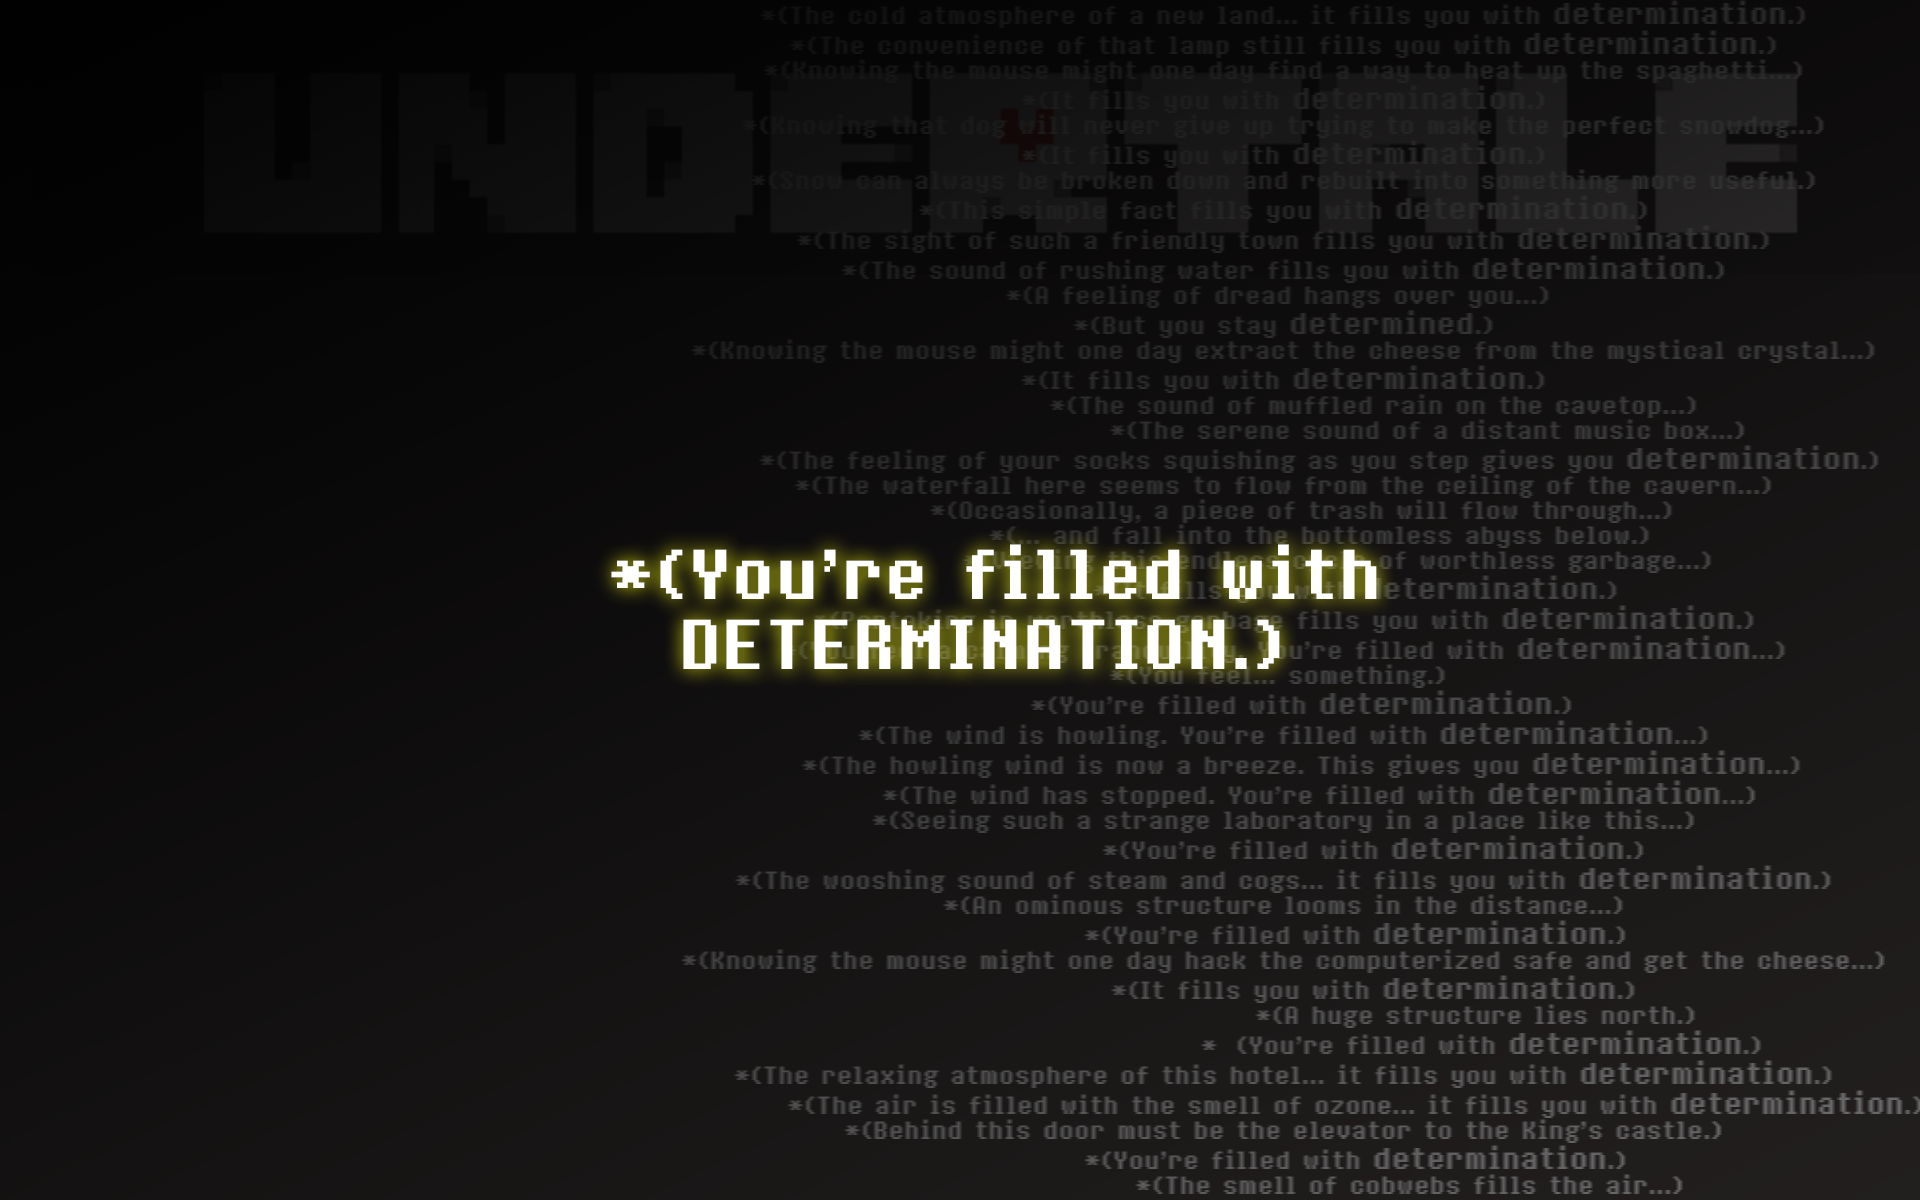 Can we get a Youre filled with DETERMINATION wallpaper Undertale